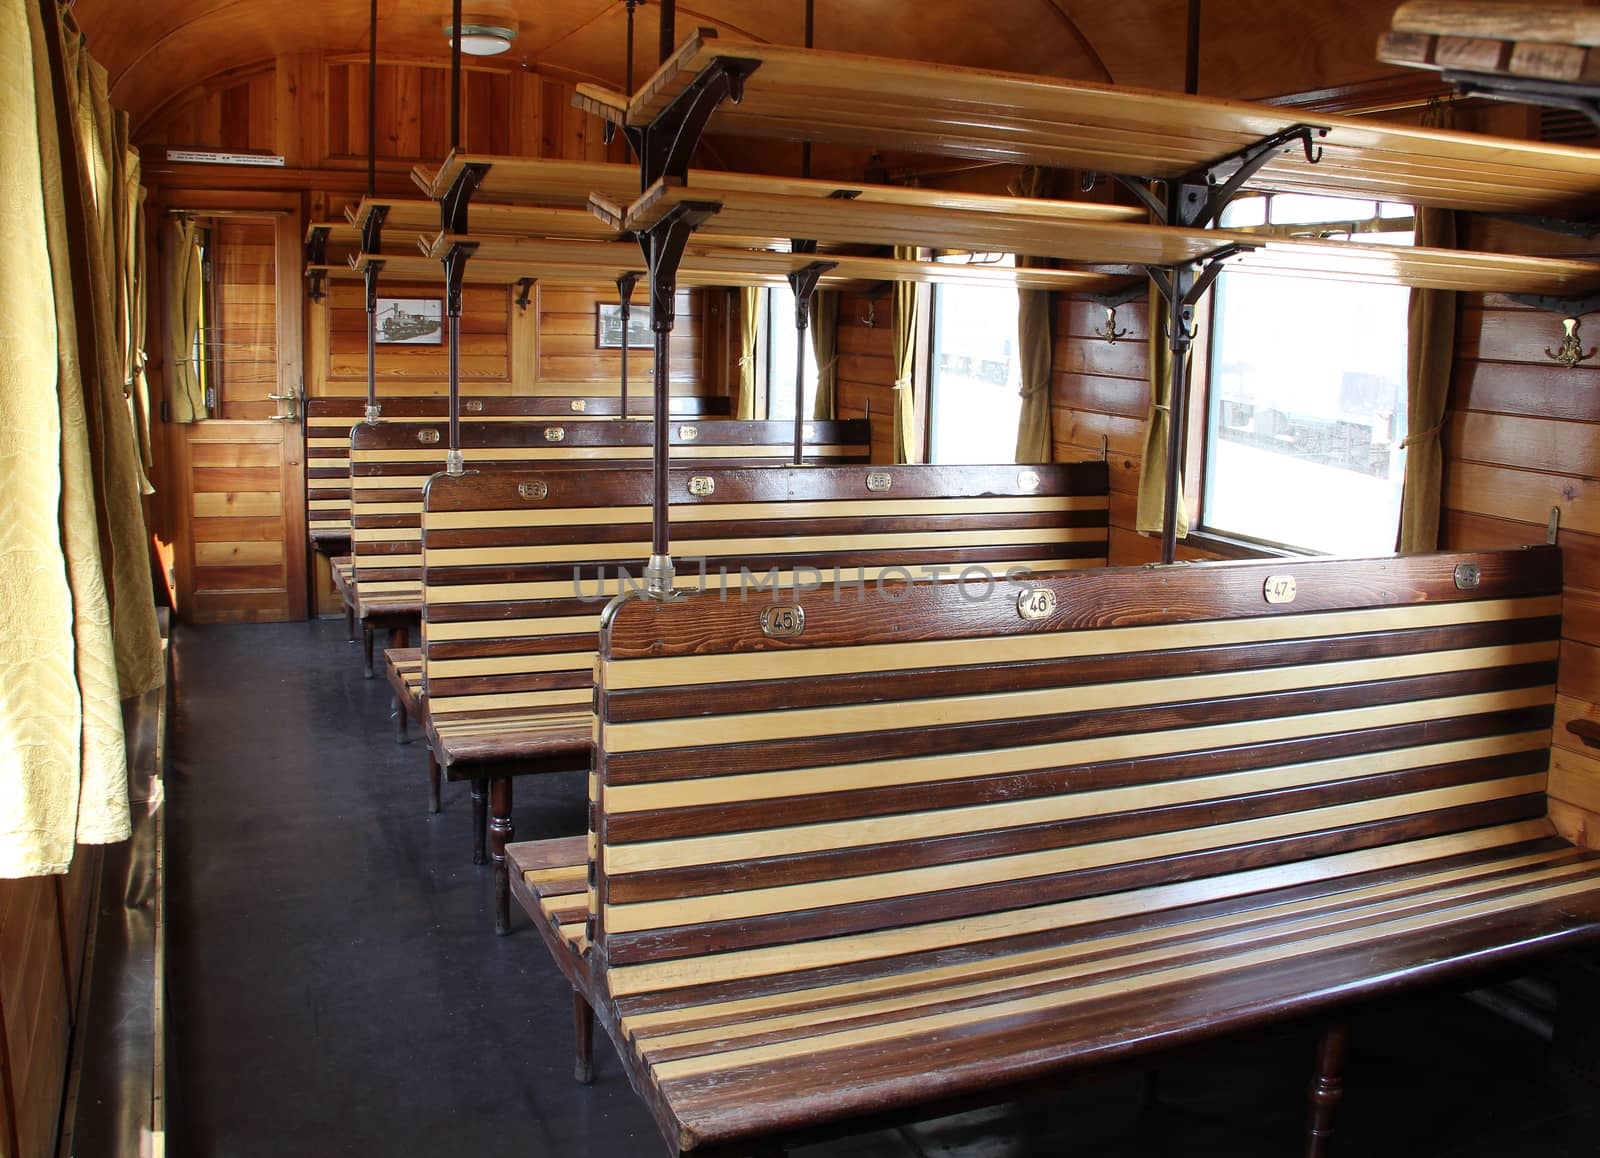 Old empty wooden benches inside the railway carriage.